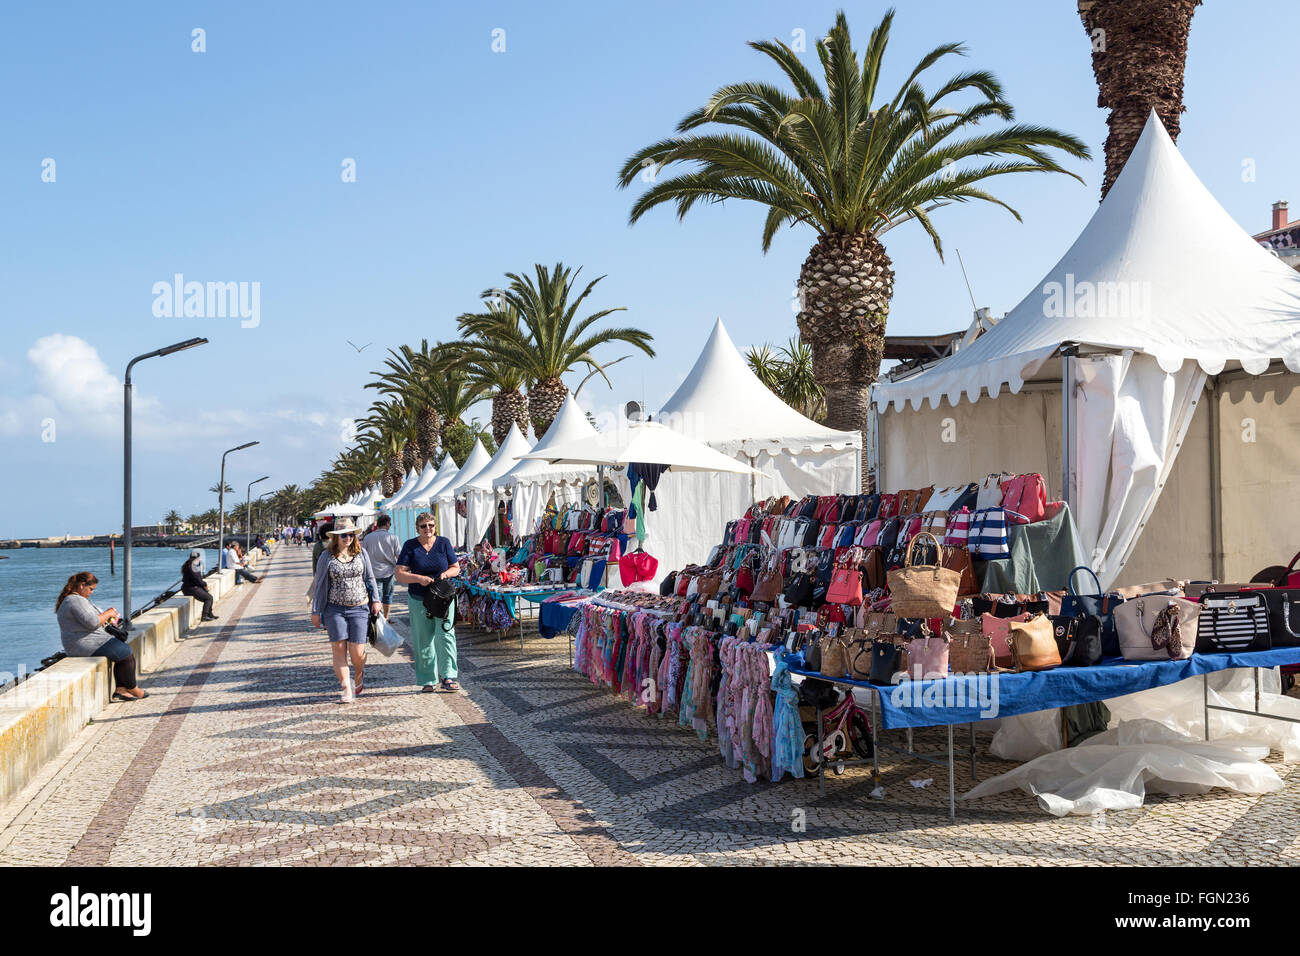 People on the waterfront promenade with market stalls in Lagos, Algarve, Portugal Stock Photo